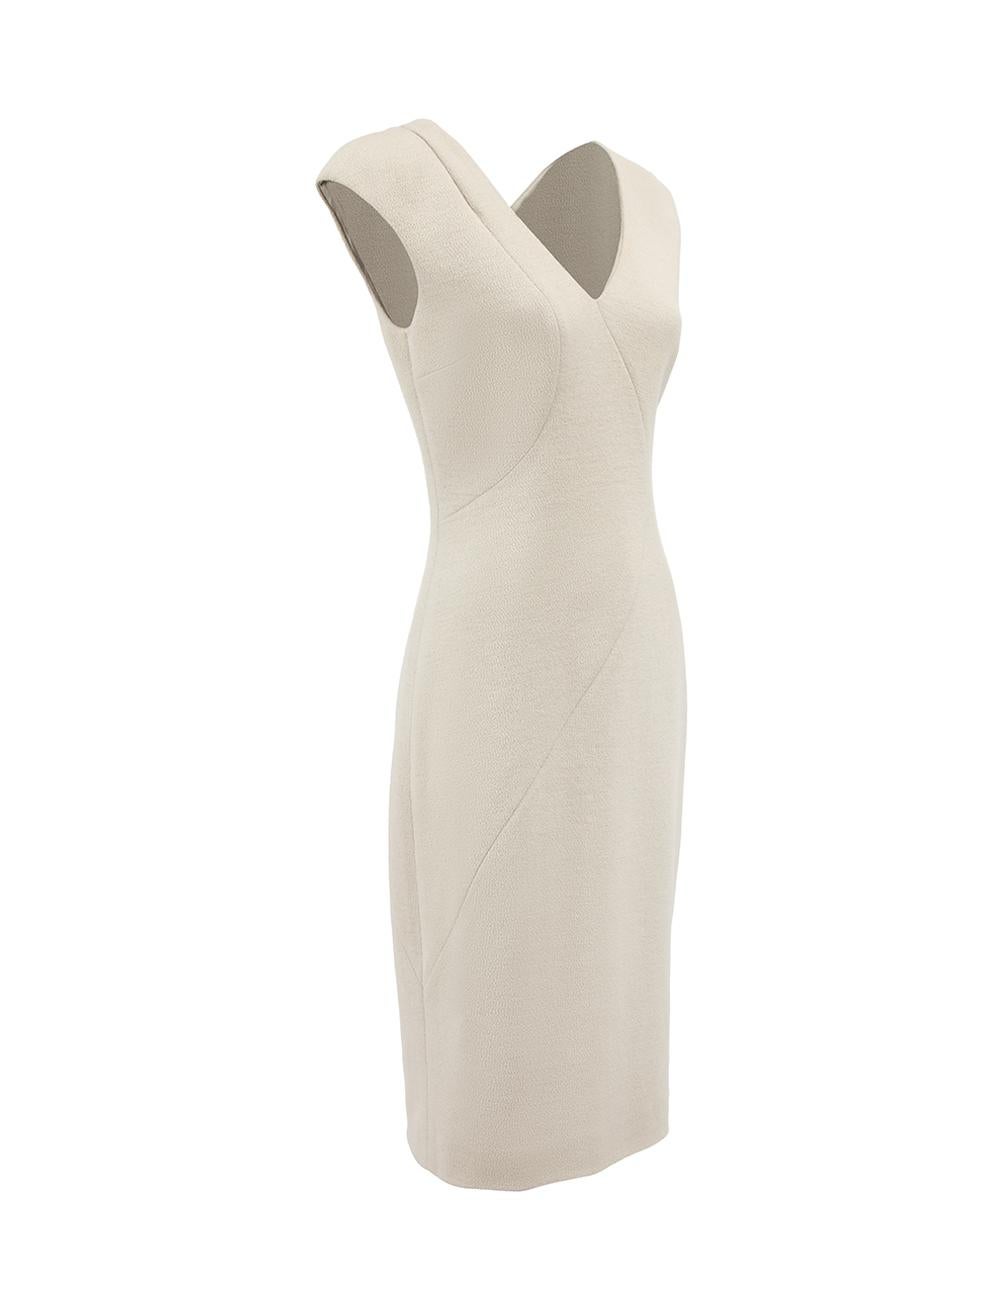 CONDITION is Very good. Hardly any visible wear to dress is evident on this used Amanda Wakeley designer resale item.



Details


Grey

Wool

Body-con dress

Midi

Shoulder cut-out

Sleeveless

V-neck

Figure hugging fit

Side zip fastening

Bottom